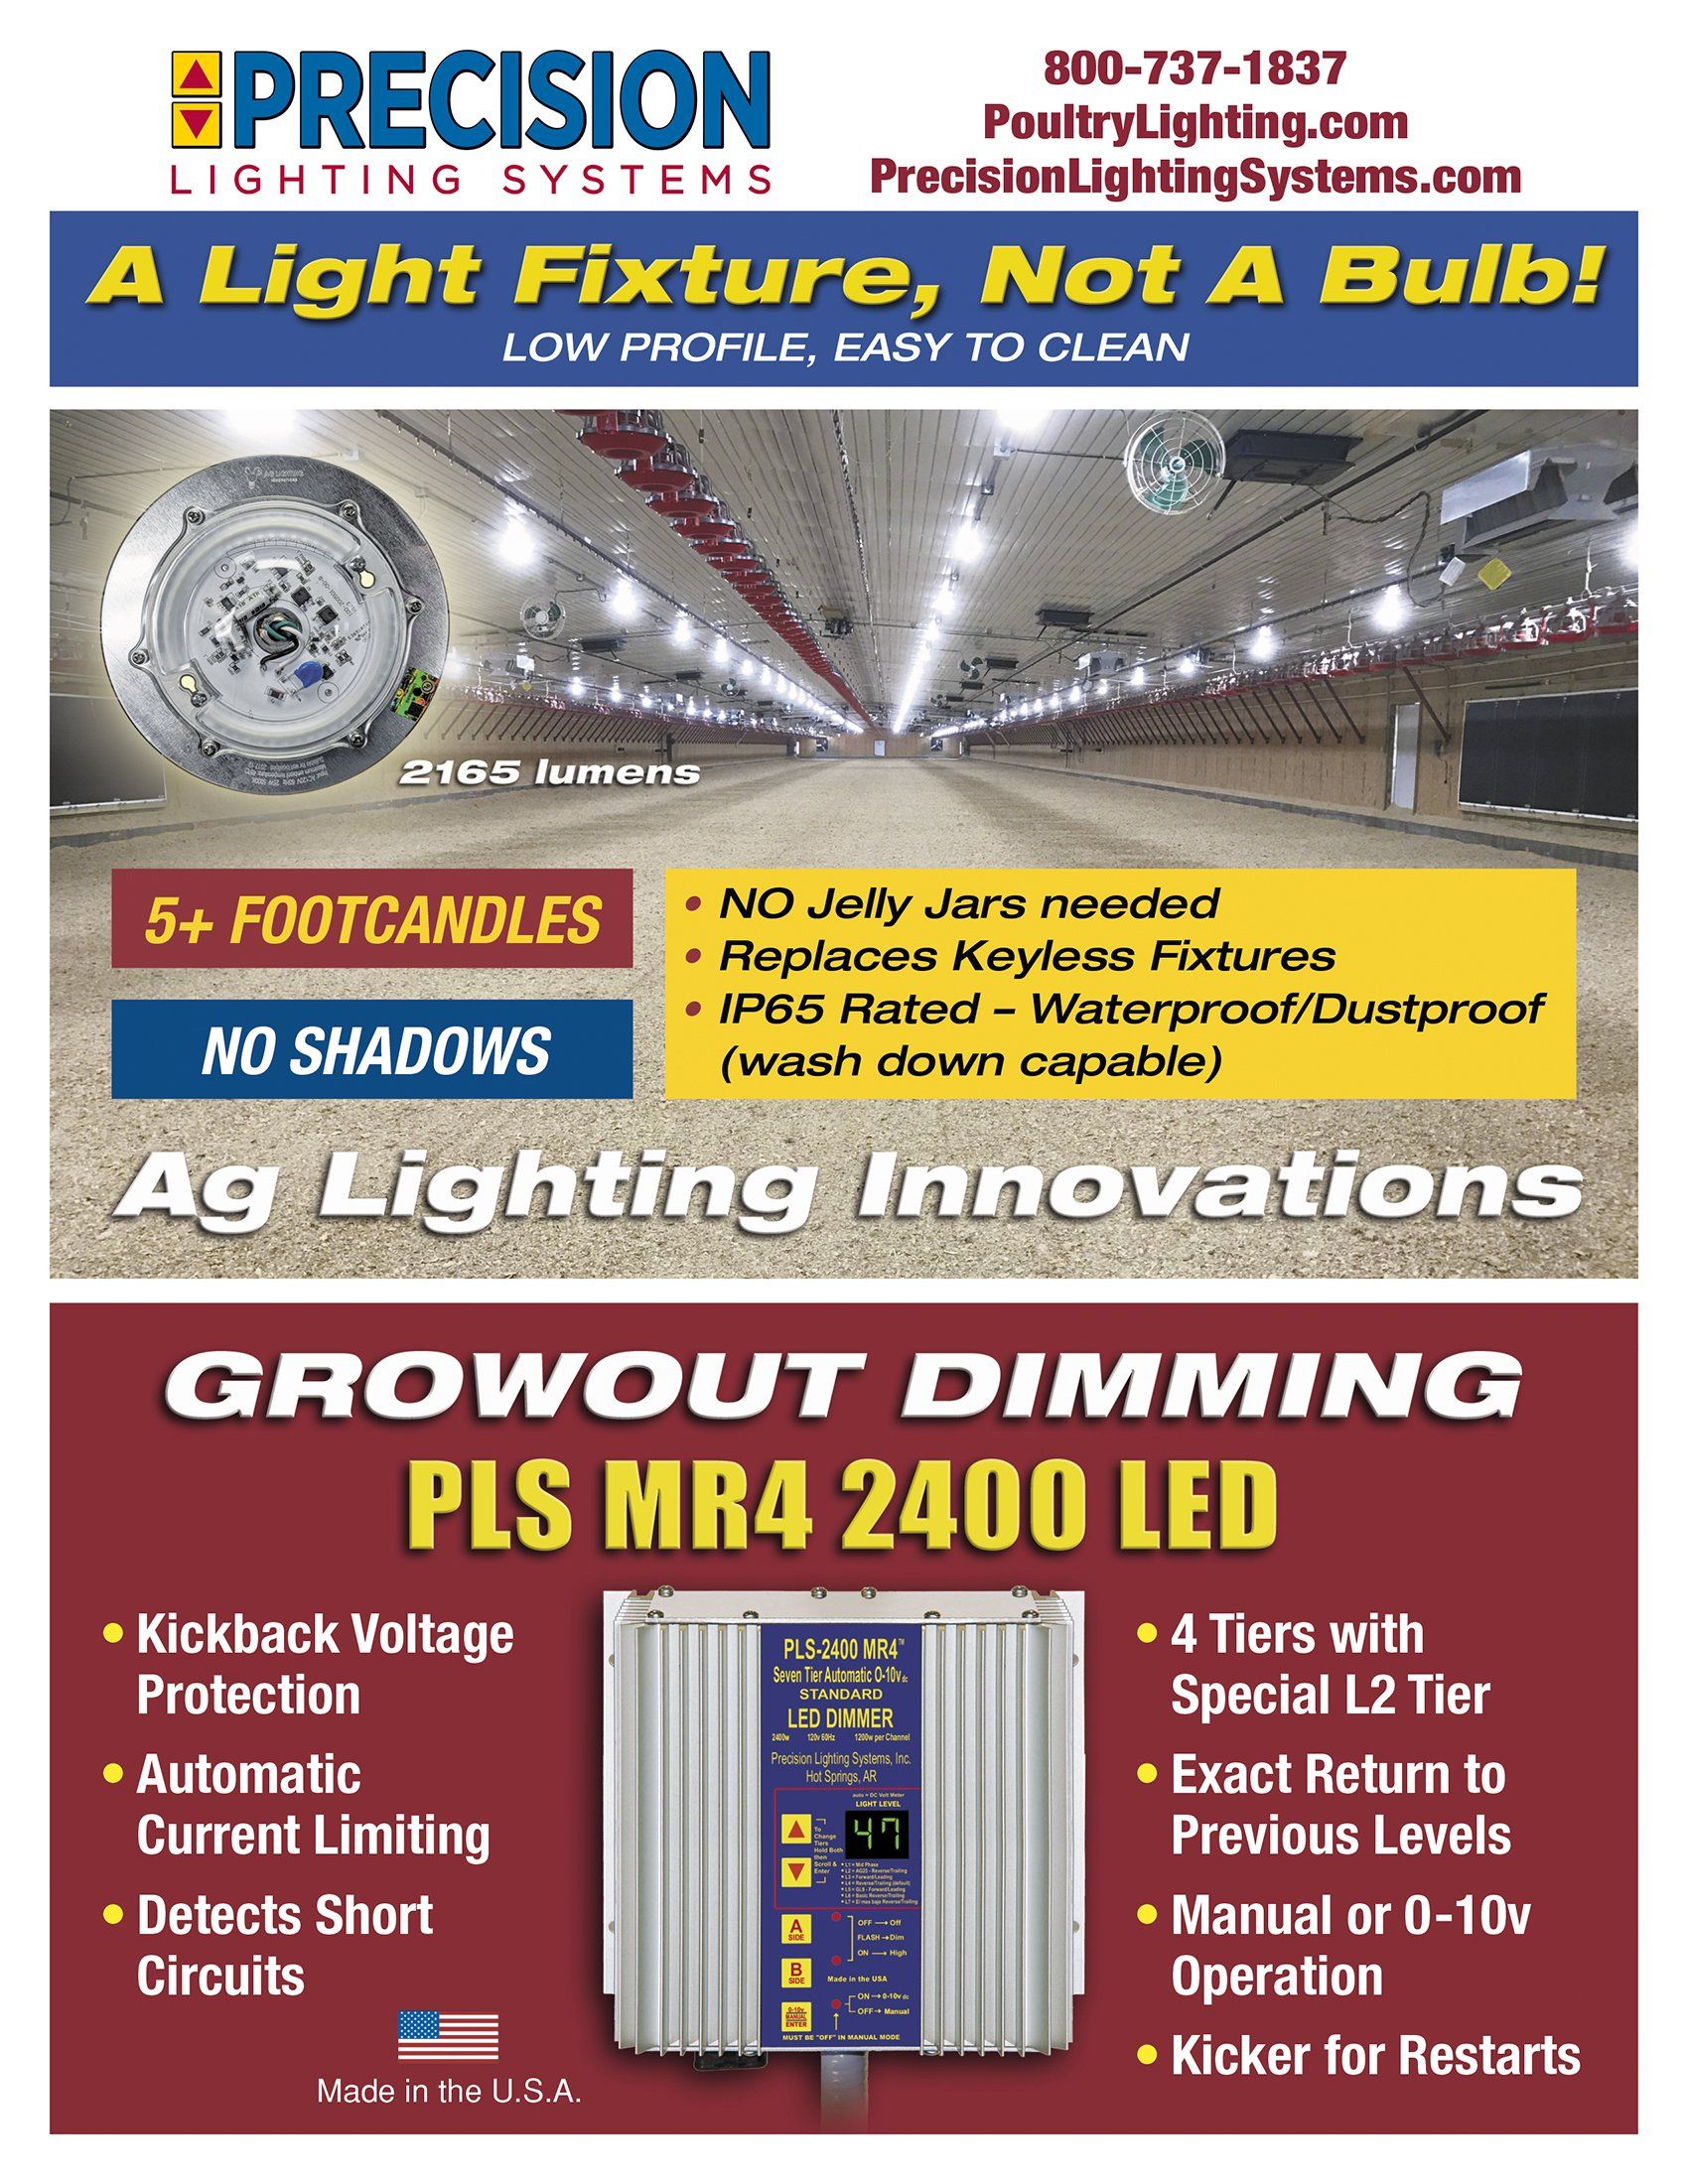 A brochure for precision lighting systems shows a light fixture , not a bulb.